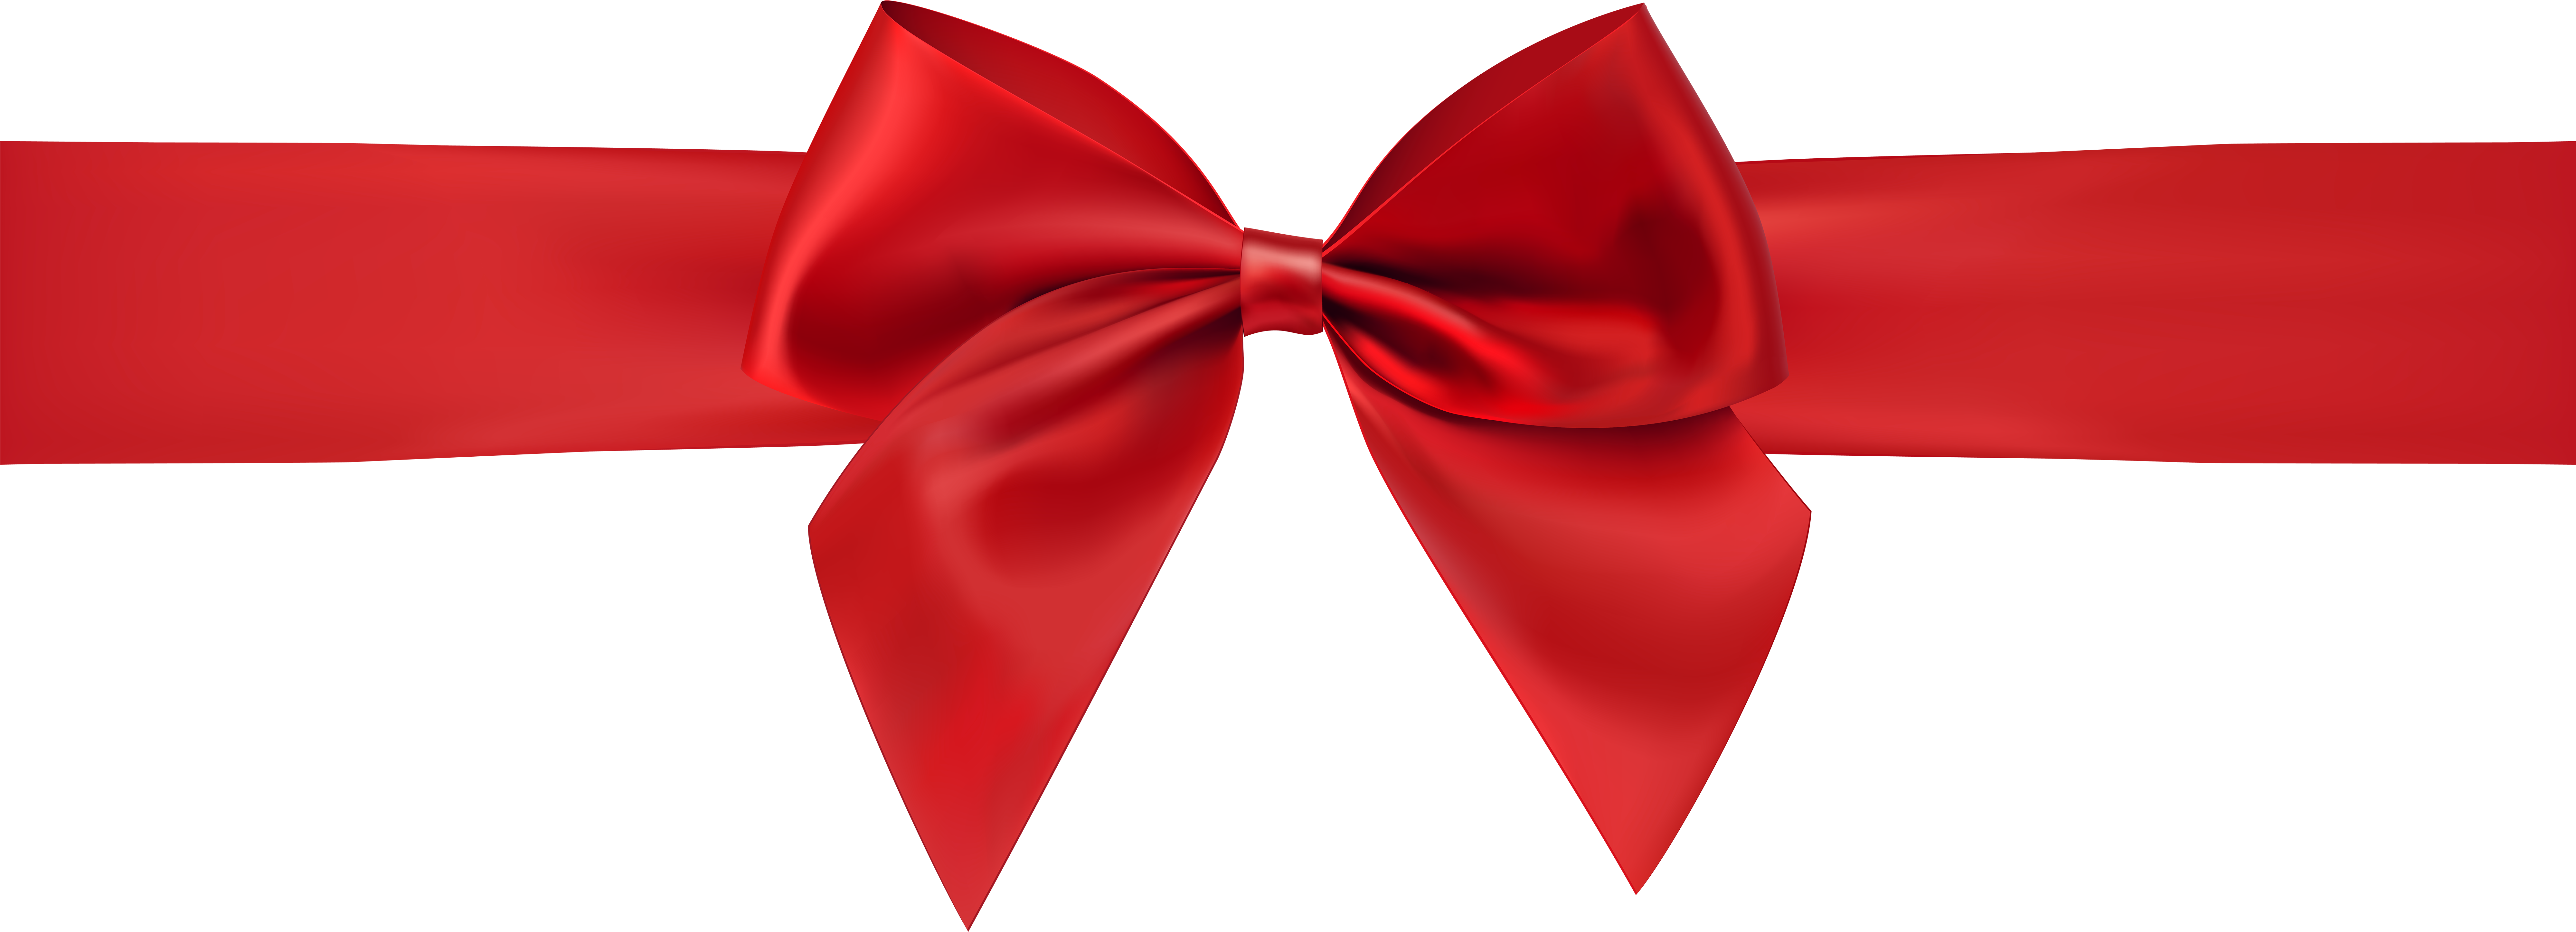 Red Ribbon T Ribbon Festive T Bow Transparent Background Png My